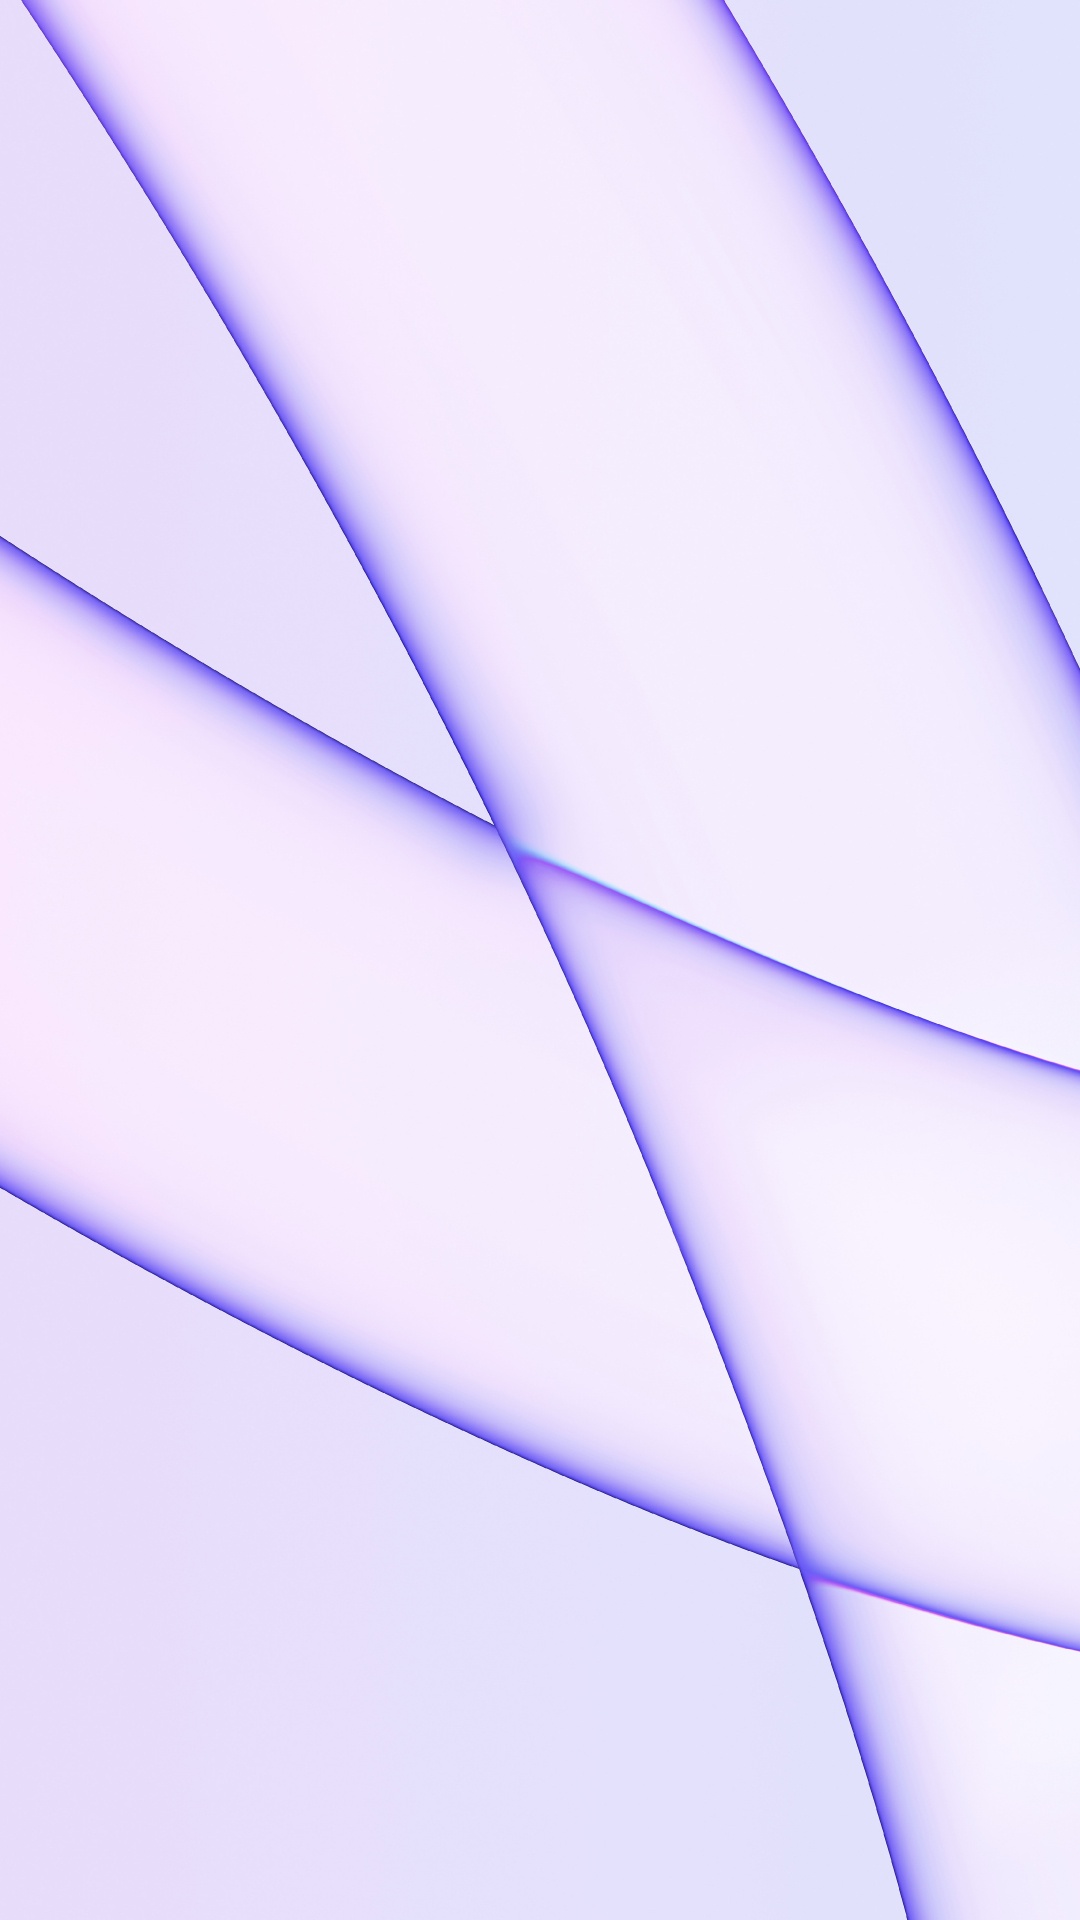 IMac Color Matching Wallpaper in Light Purple for IPad or Desktop. Wallpaper in 1080x1920 Resolution